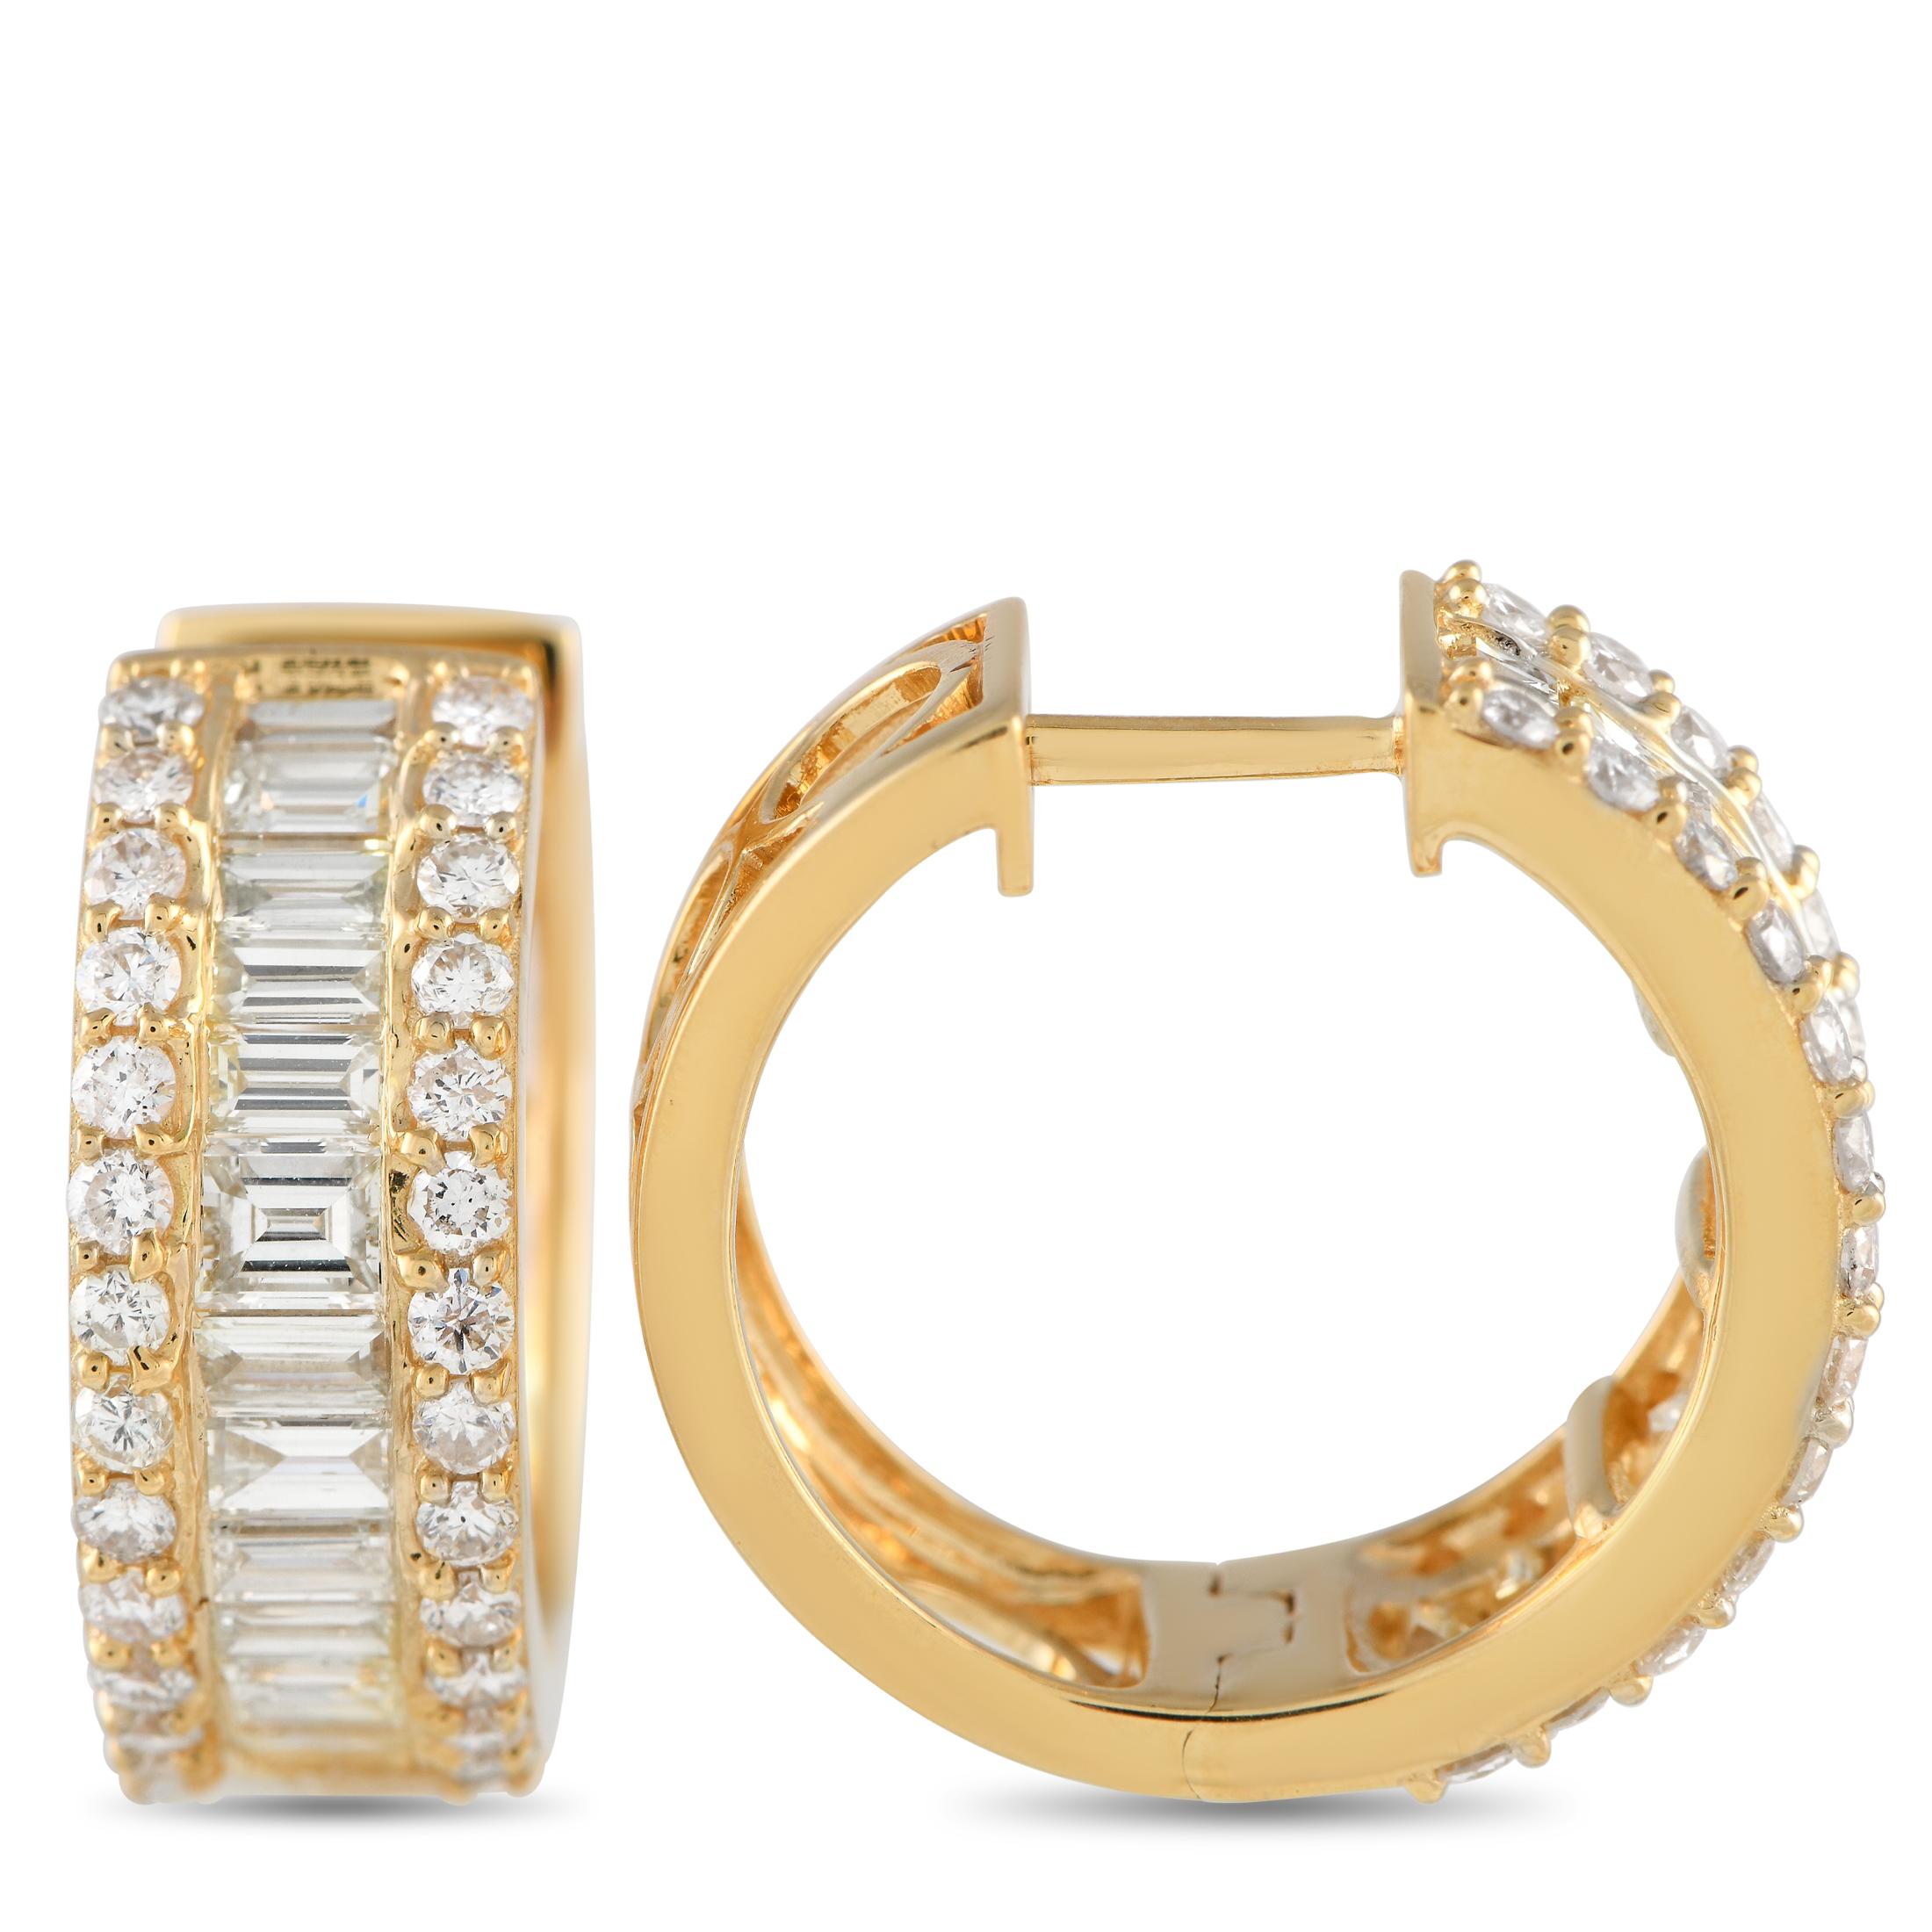 An opulent 18K Yellow Gold setting measuring 0.75” round sets the stage for a series of sparkling diamonds on each one of these exquisite earrings. Bold and incredibly eye-catching, they come to life thanks to 0.77 carats of round-cut diamonds and